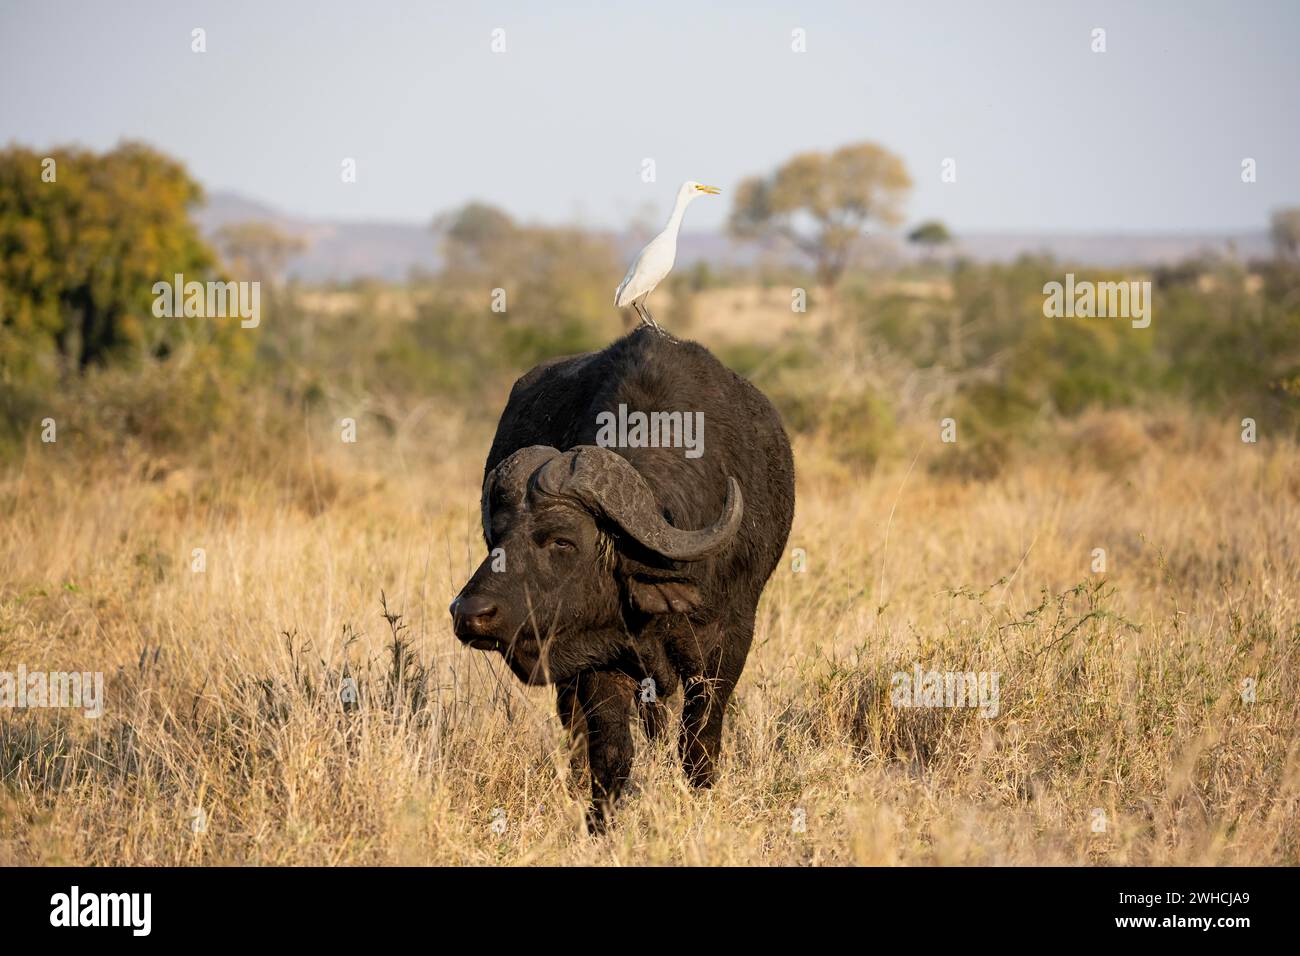 Cattle egret (Bubulcus ibis) sitting on the back of a african buffalo (Syncerus caffer caffer), standing in dry grass, African savannah, funny Stock Photo